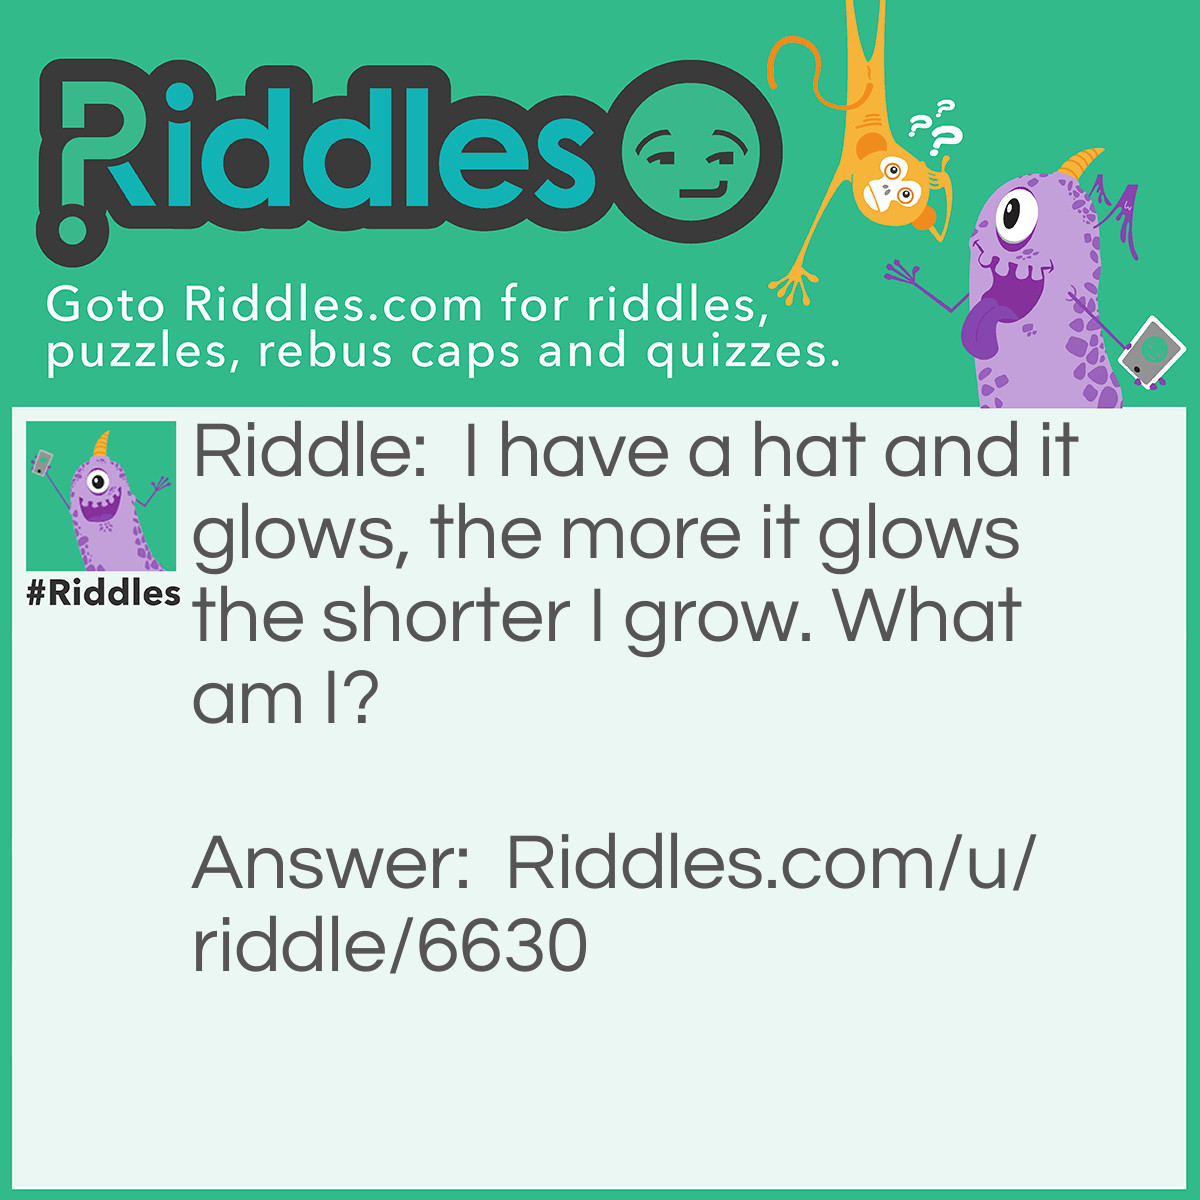 Riddle: I have a hat and it glows, the more it glows the shorter I grow. What am I? Answer: A Candle.